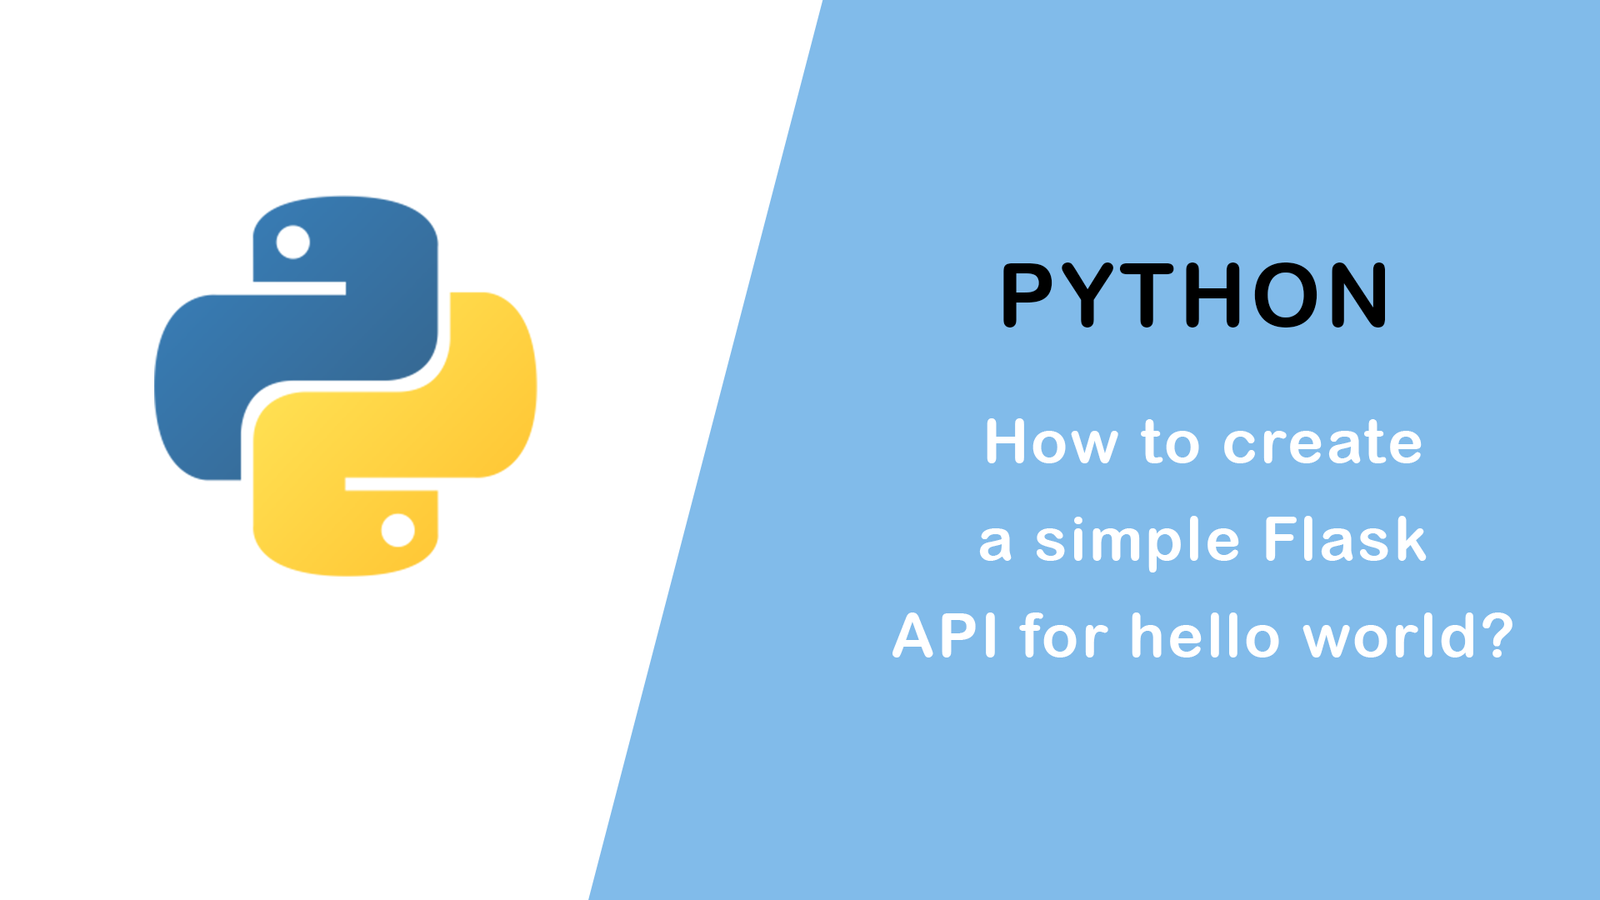 How to create a simple Flask API for hello world?